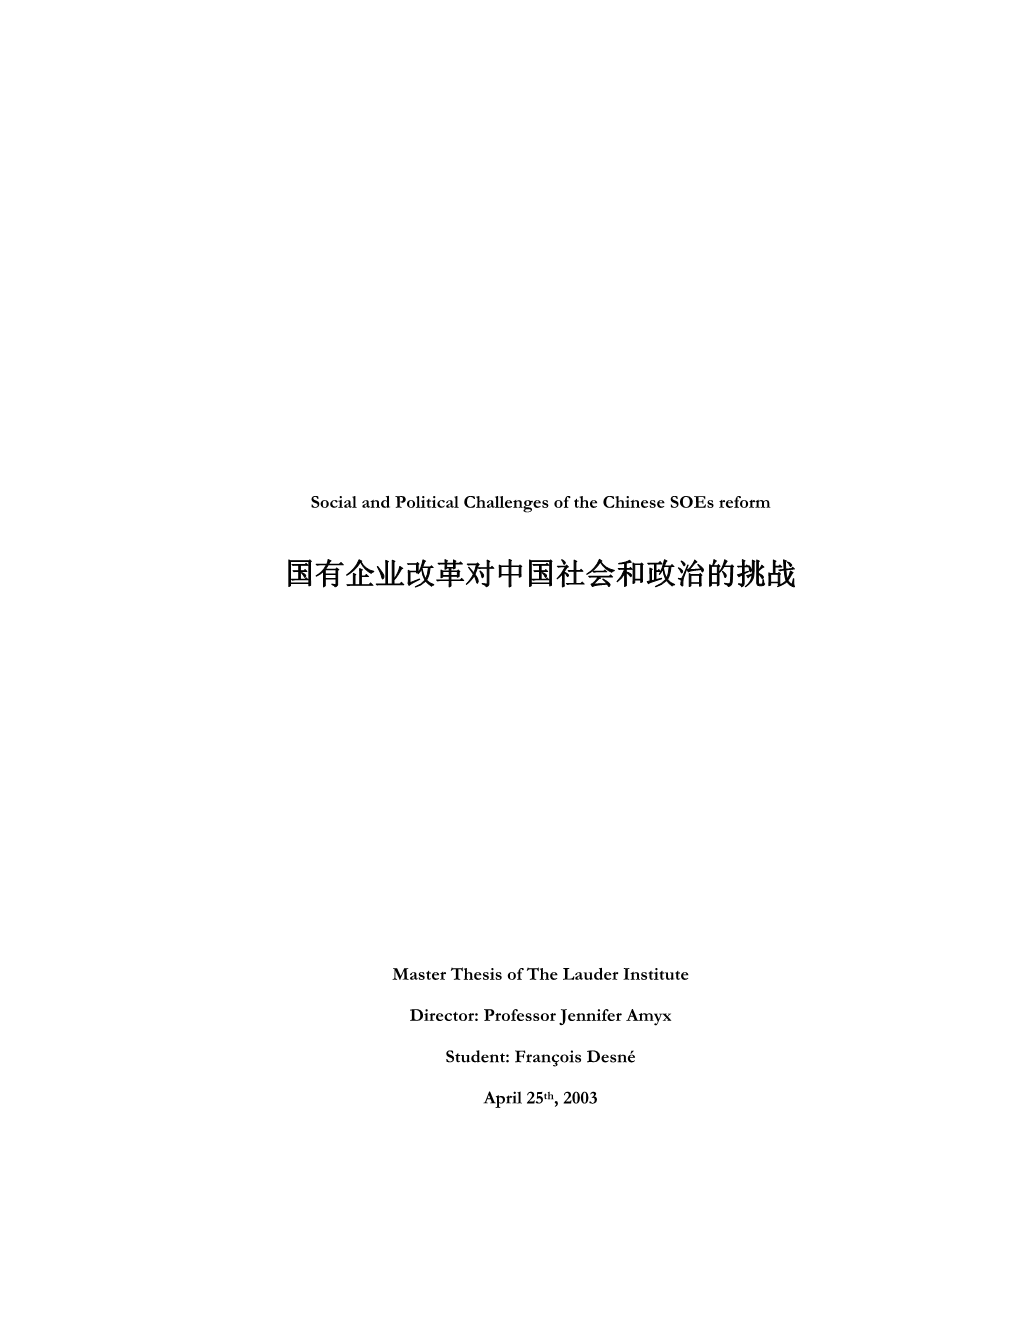 Social and Political Challenges of the Chinese SOE Reform